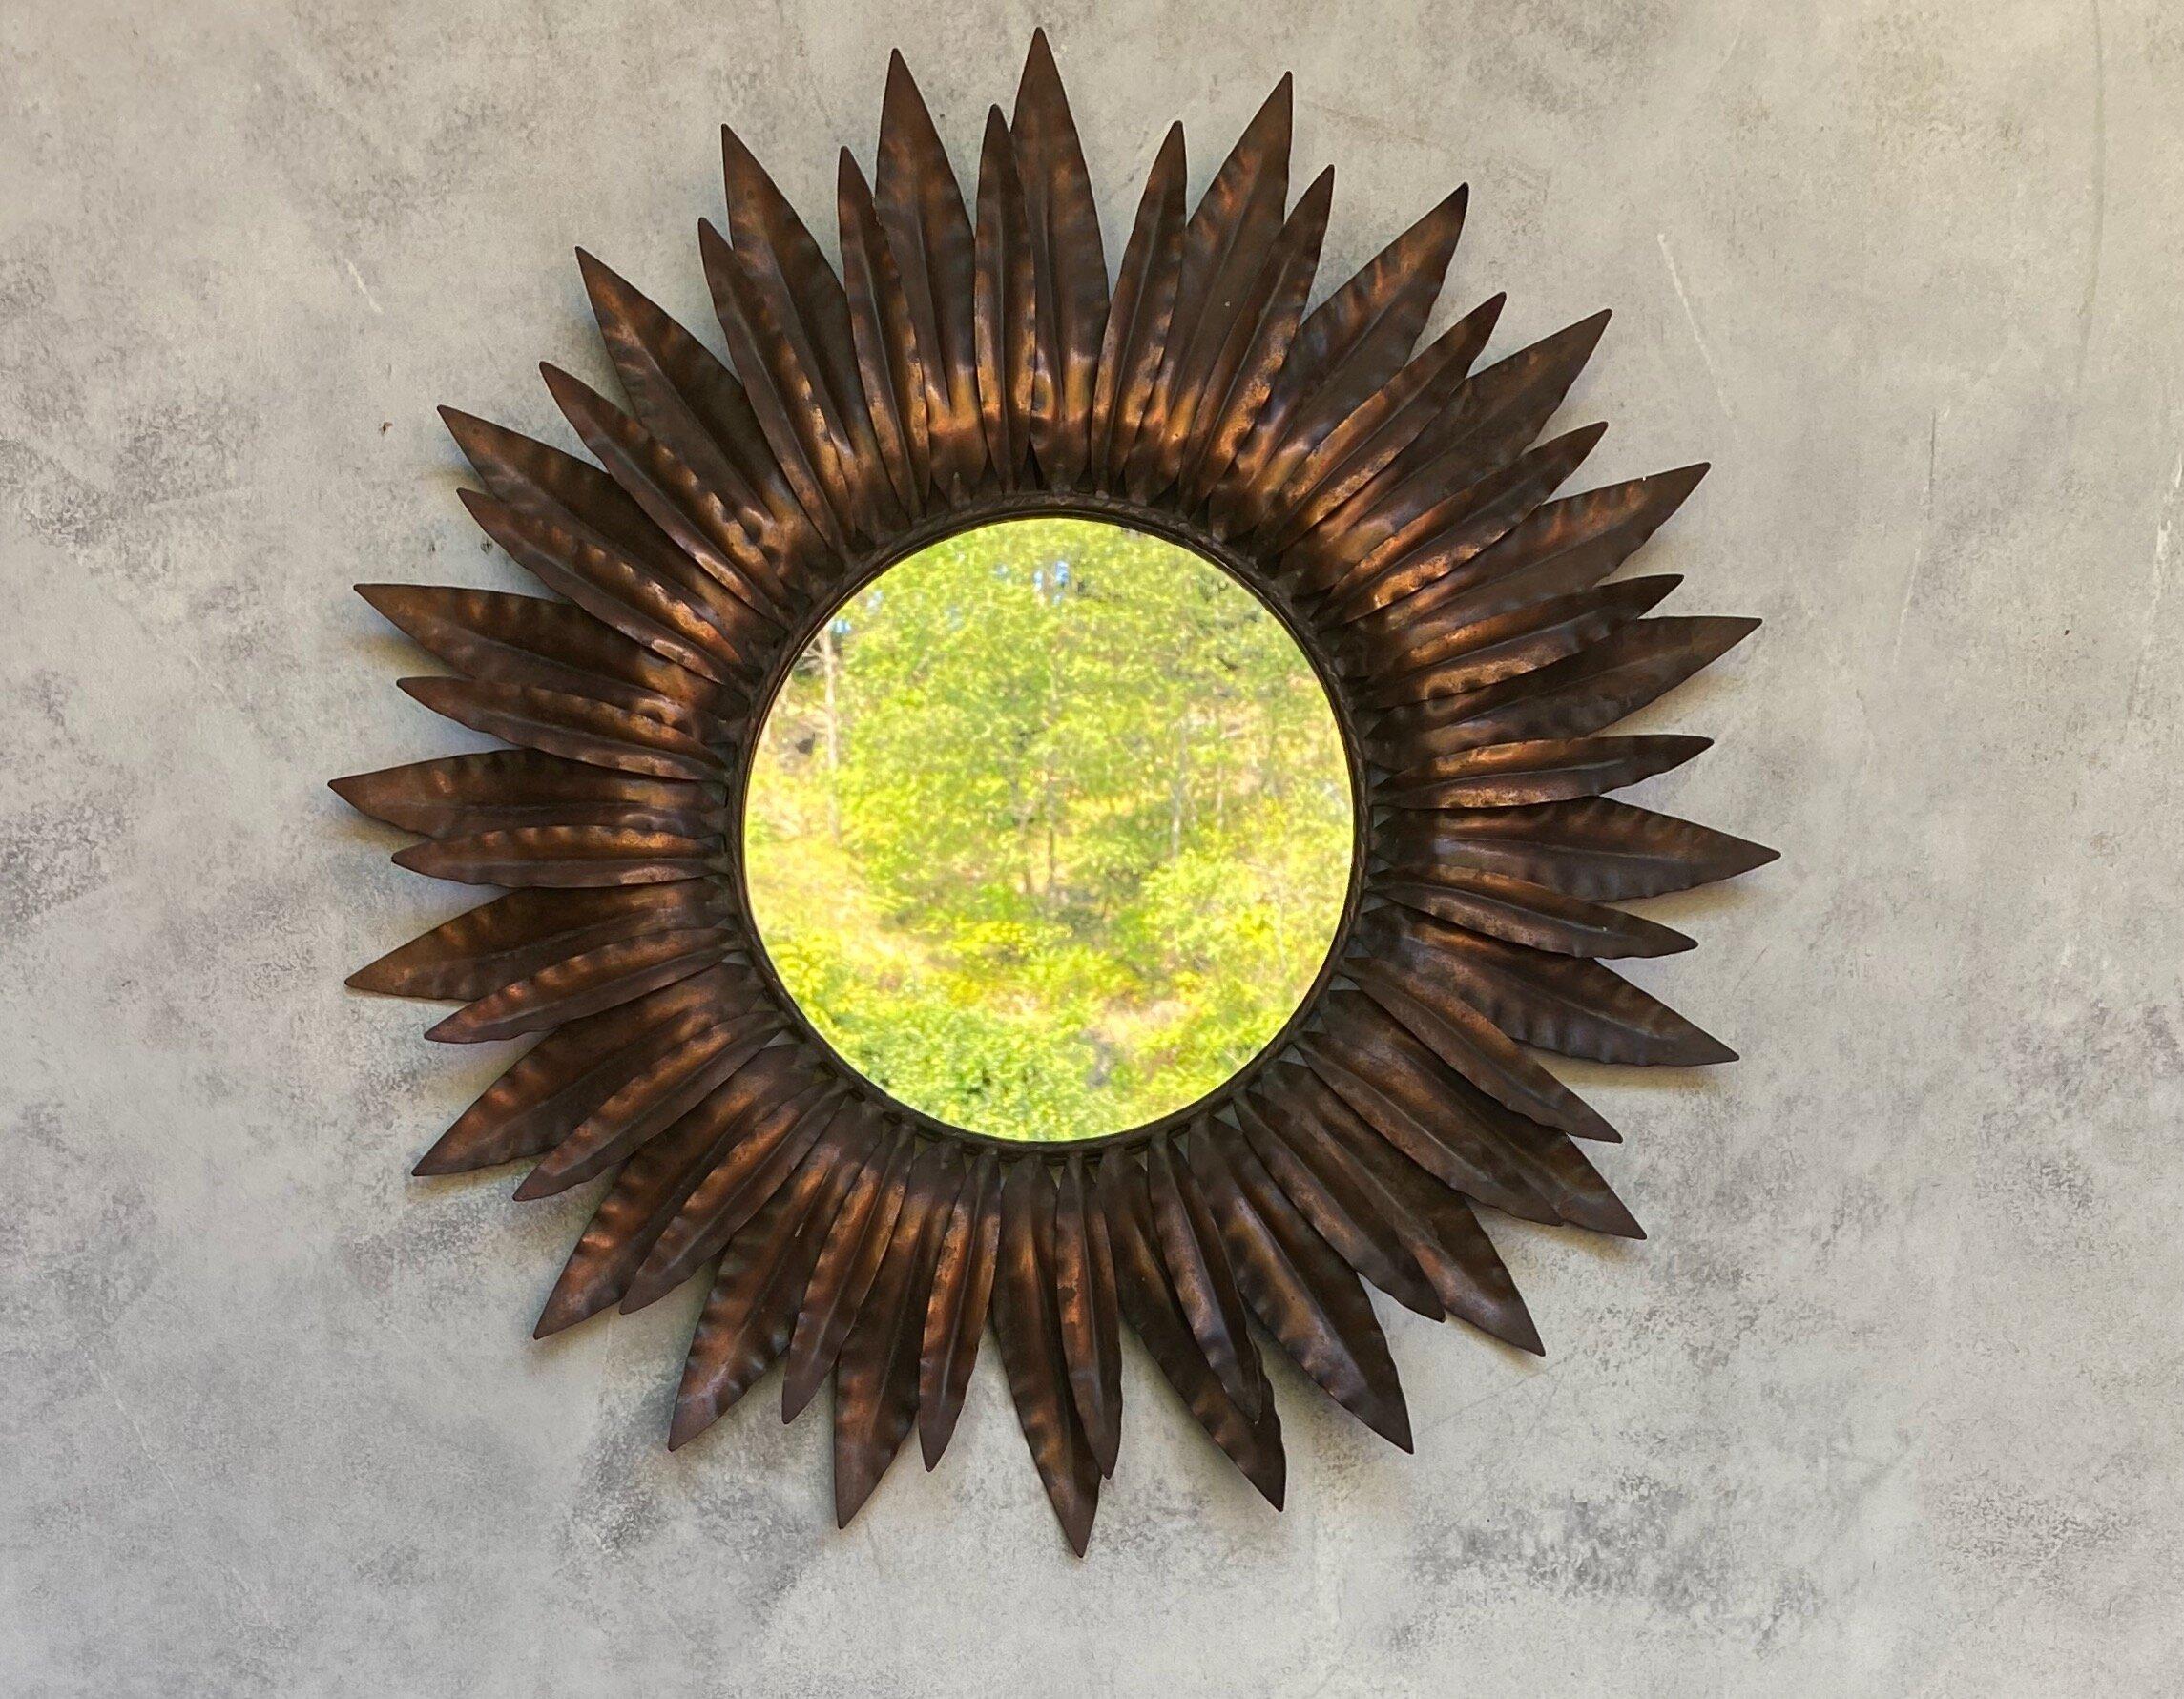 This unusual sunburst mirror captures the beauty and charm of the Spanish countryside. The mirror boasts a unique double layer of radiating leaves, each with its own rich copper plated patina, giving it a distinctive look that's sure to catch the